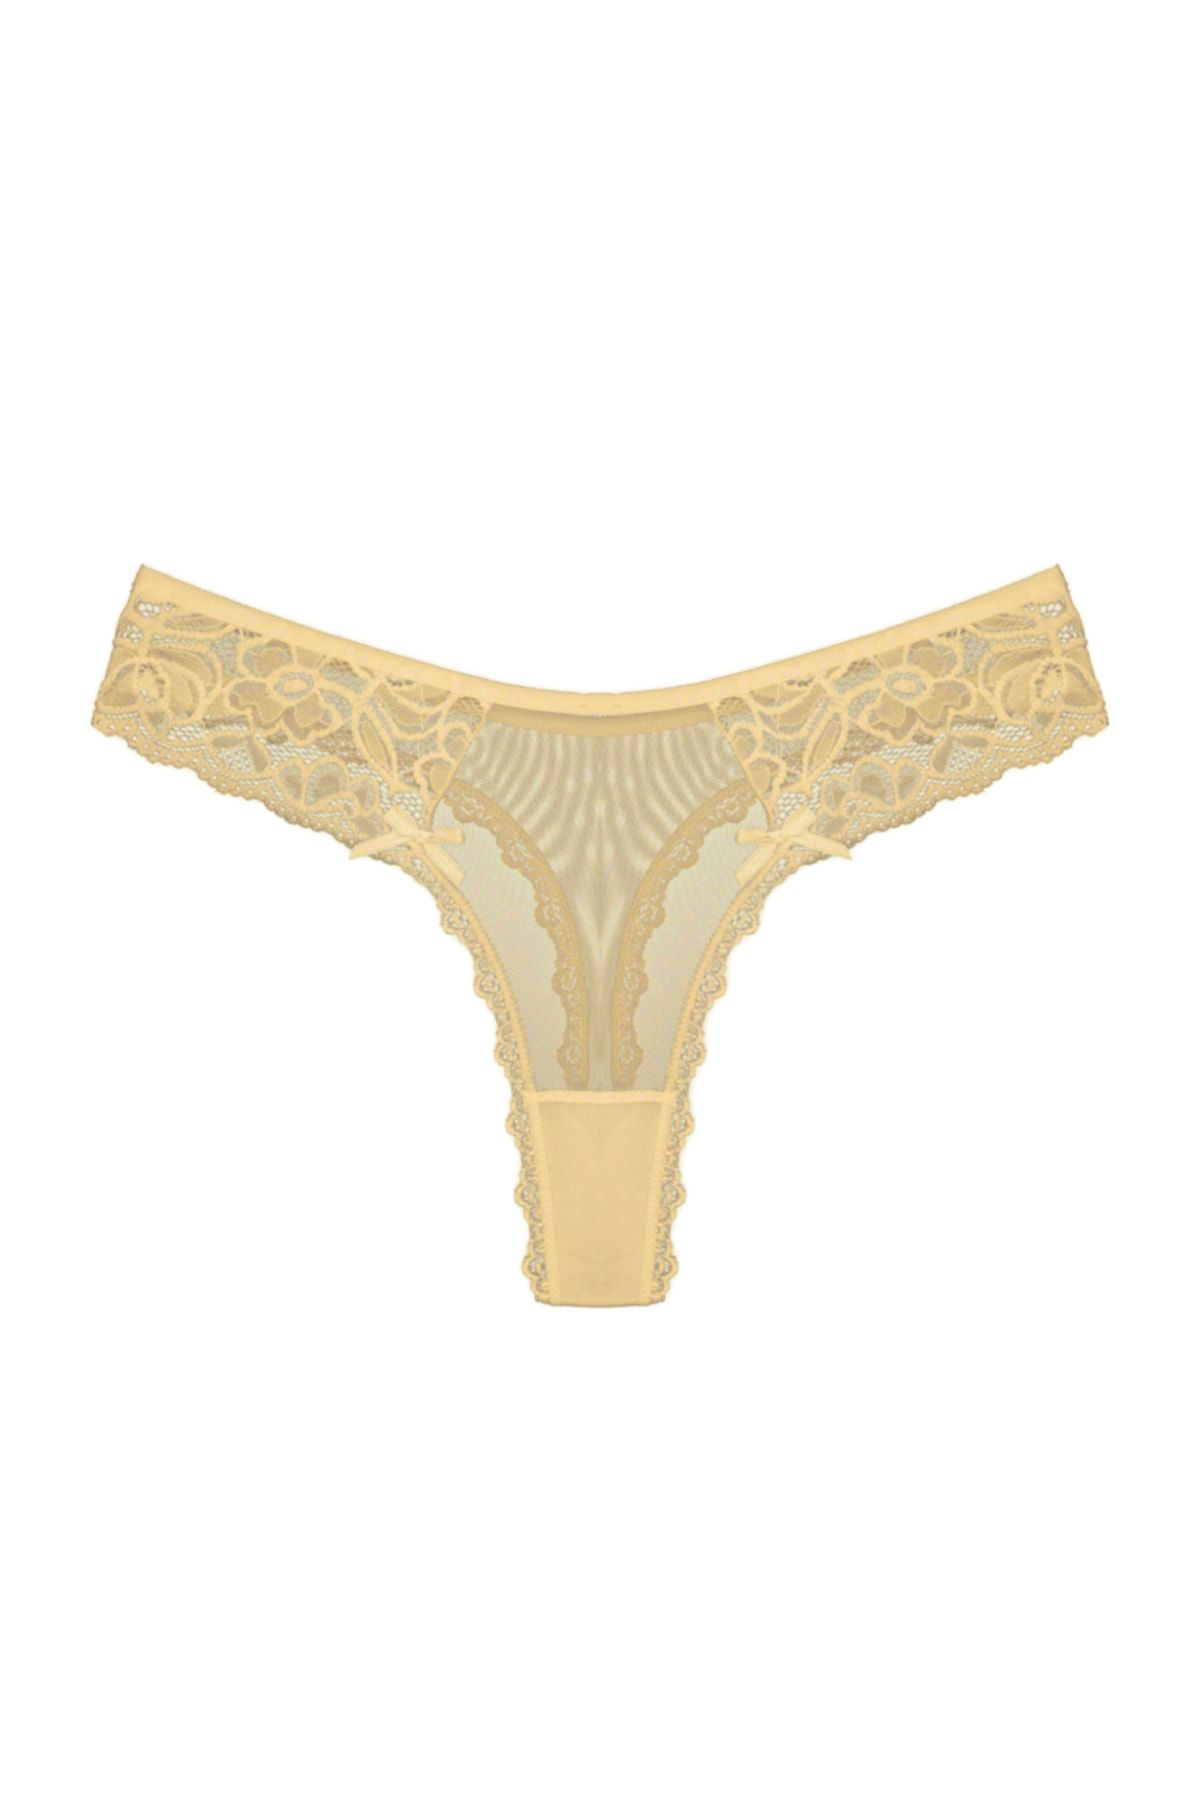 HNX Skinny Front and Back Tulle Lace Detailed Thong Women's